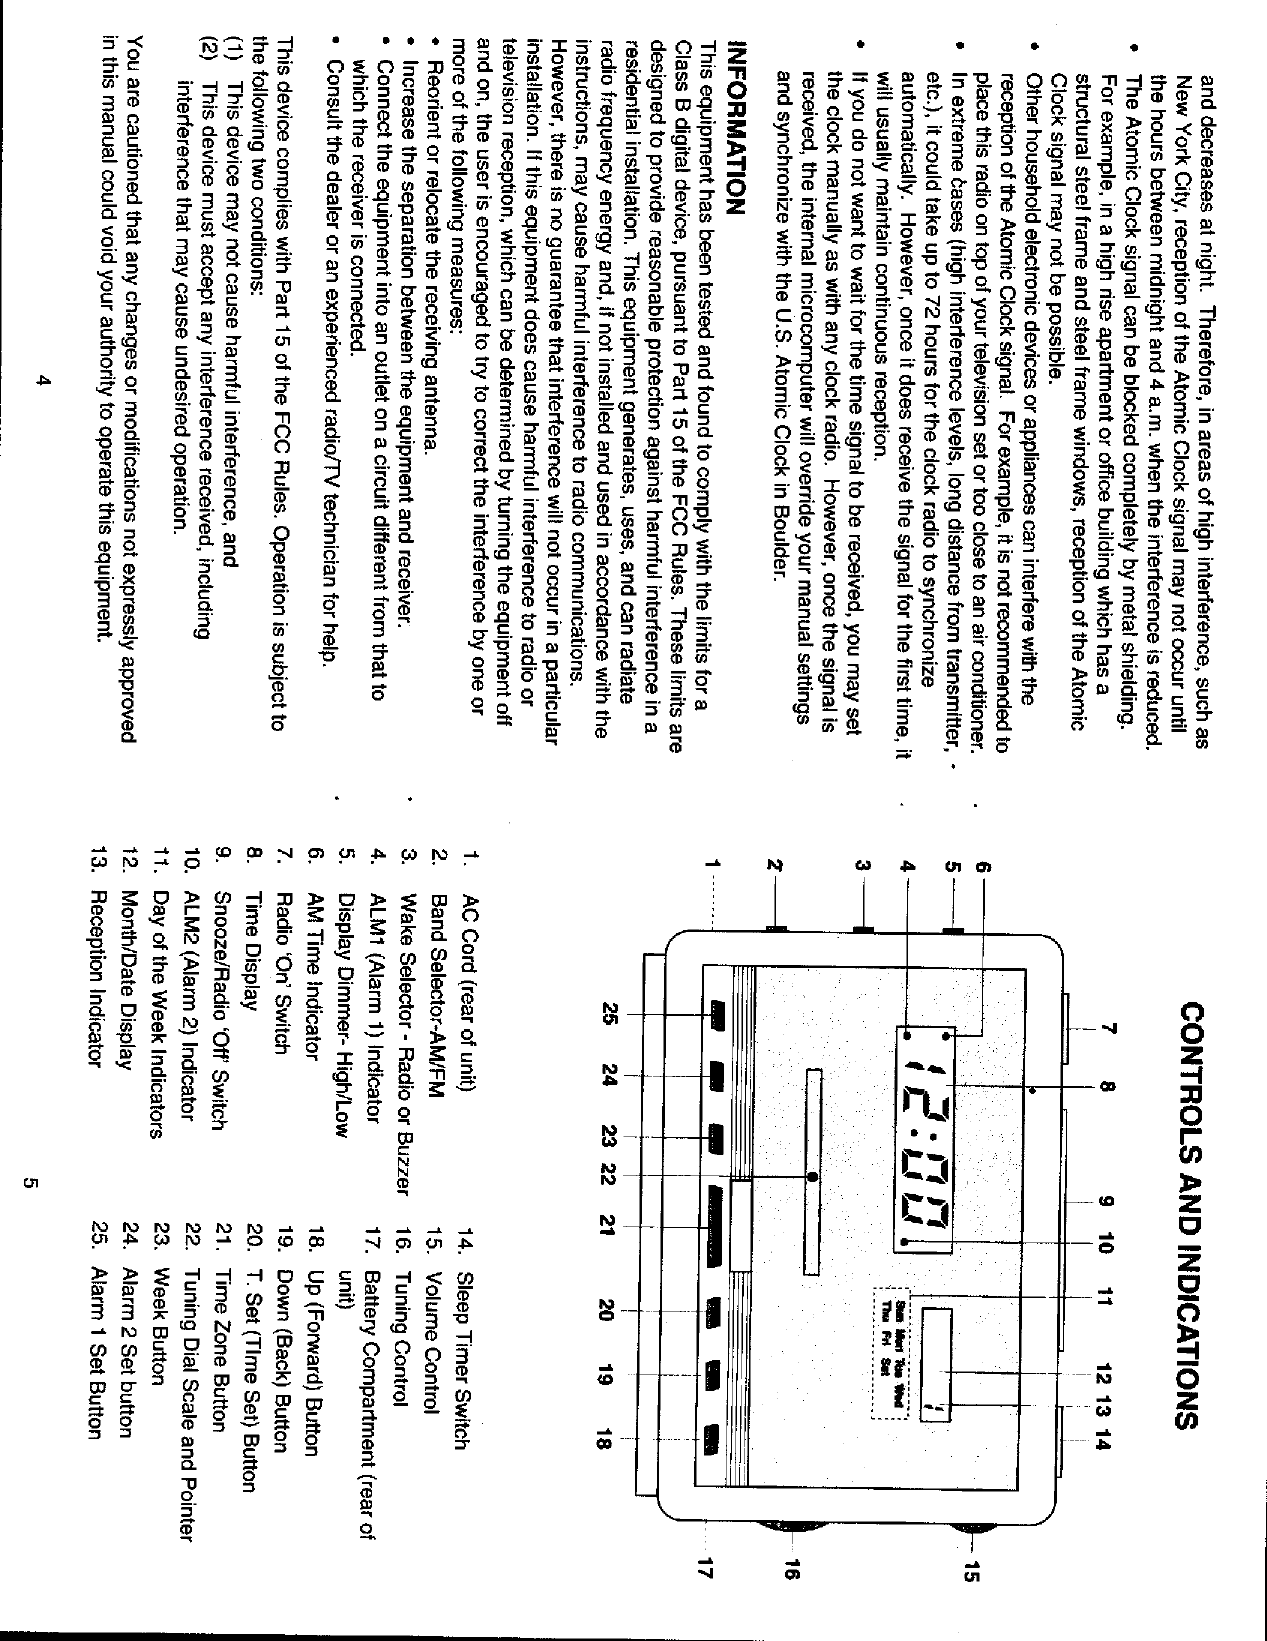 Page 4 of 10 - Emerson  File